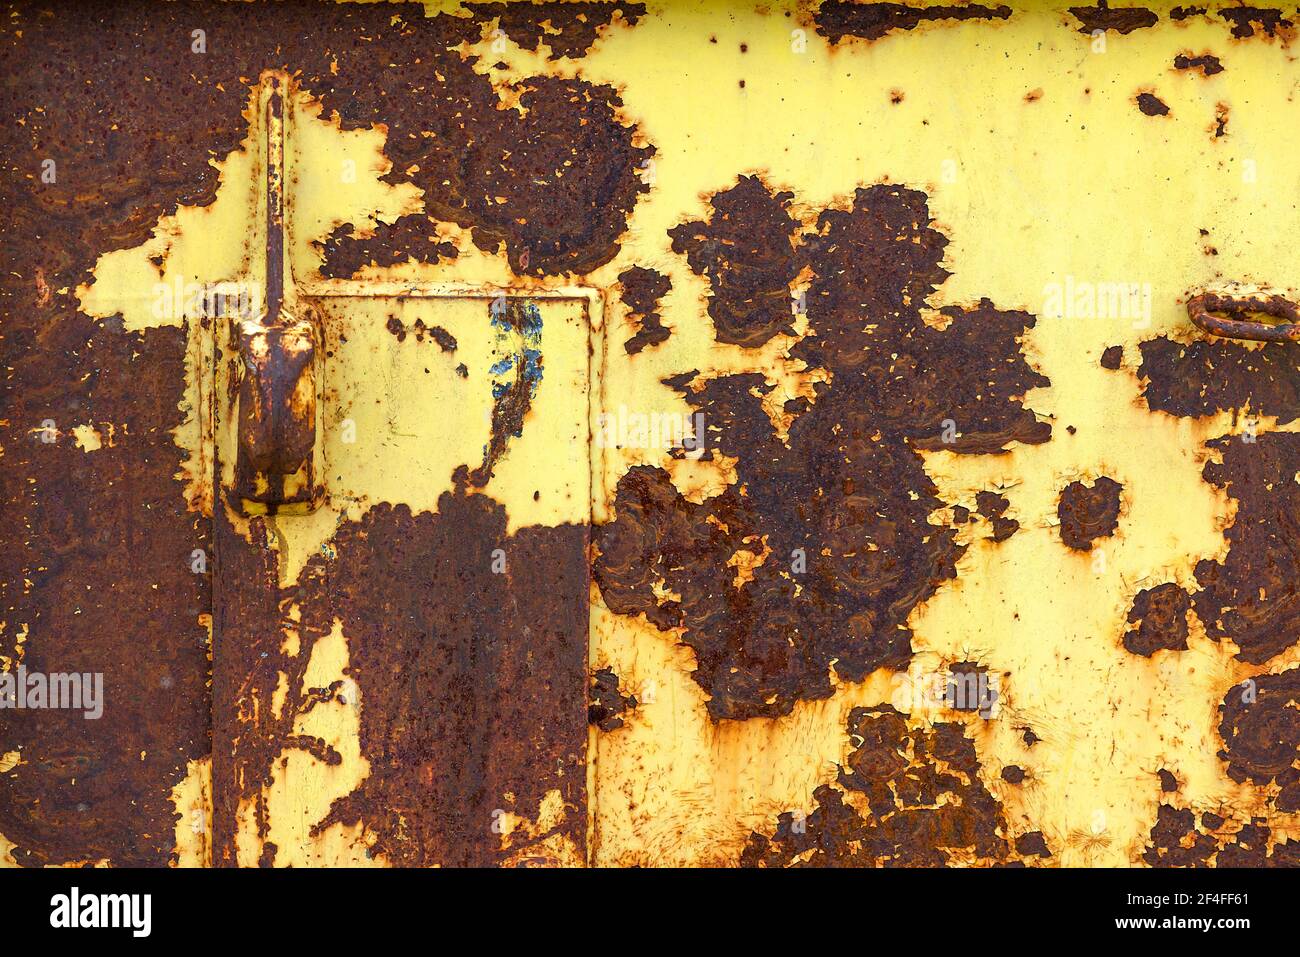 Yellow painted rusty metal plate, background image, Germany Stock Photo